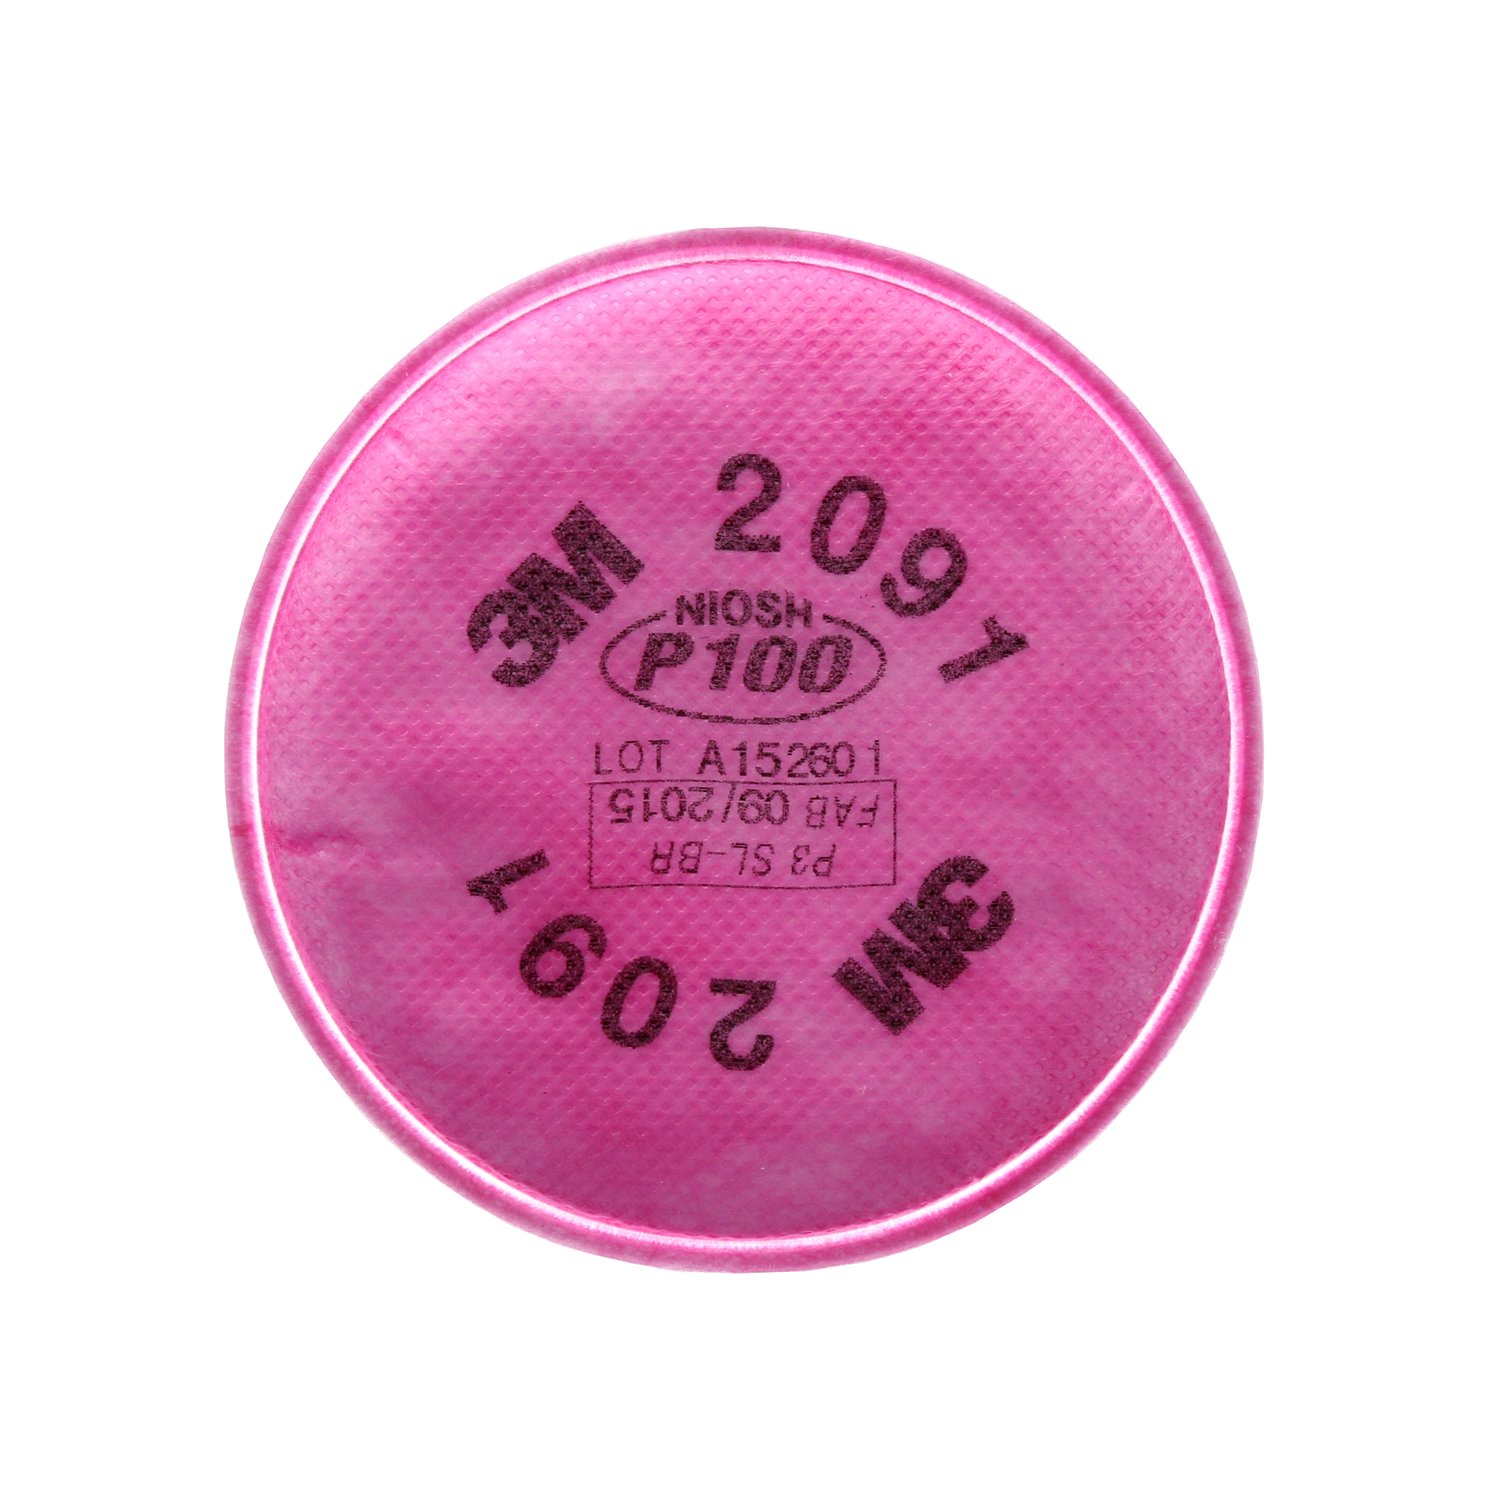 7000051991 - 3M Particulate Filter 2091/07000(AAD), P100 100 EA/Case